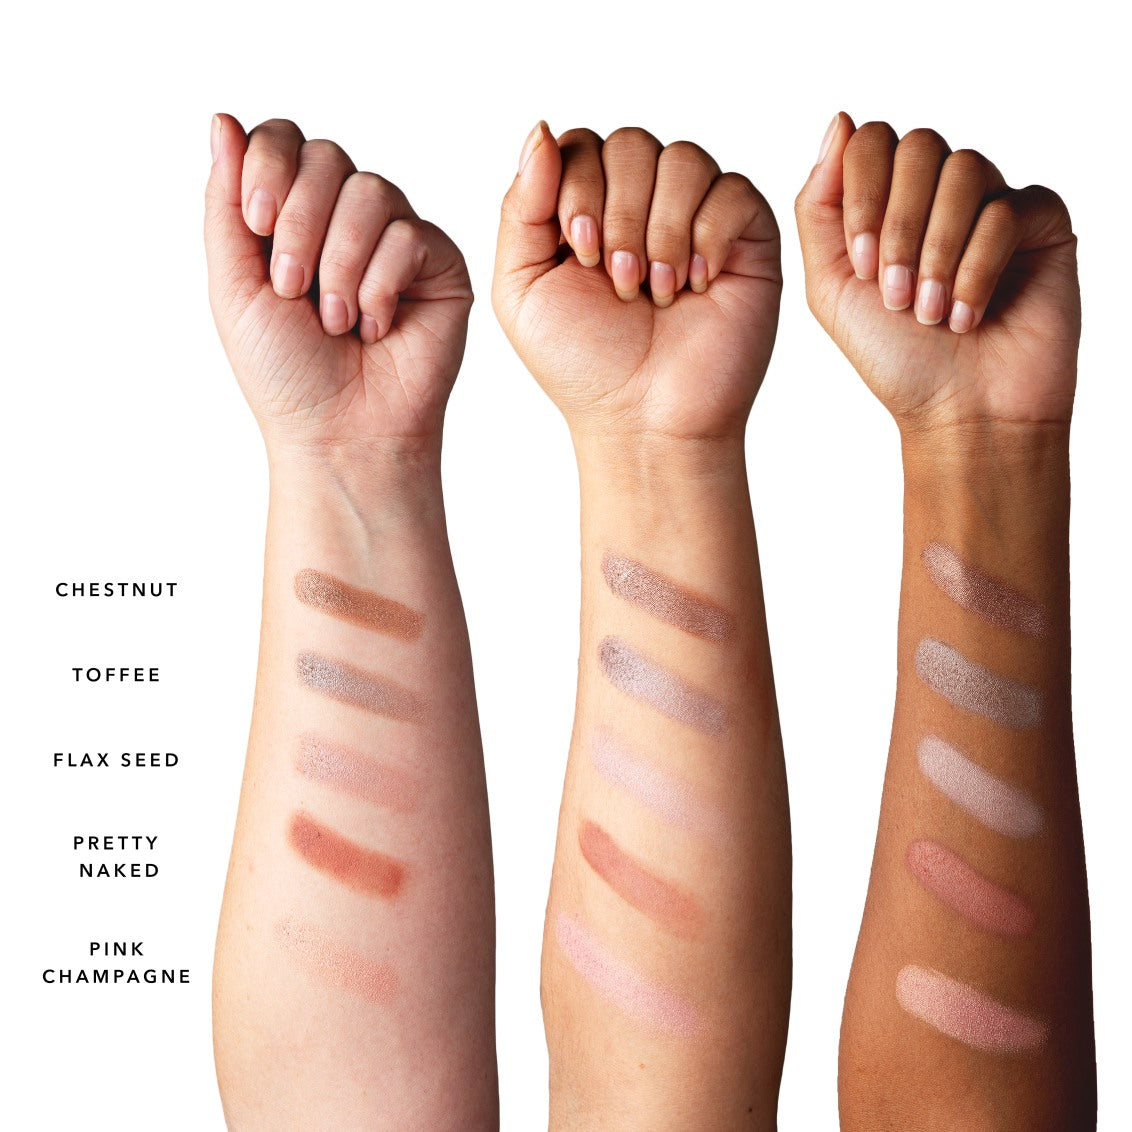 100% PURE® Fruit Pigmented® Pretty Naked Palette at Socialite Beauty Canada